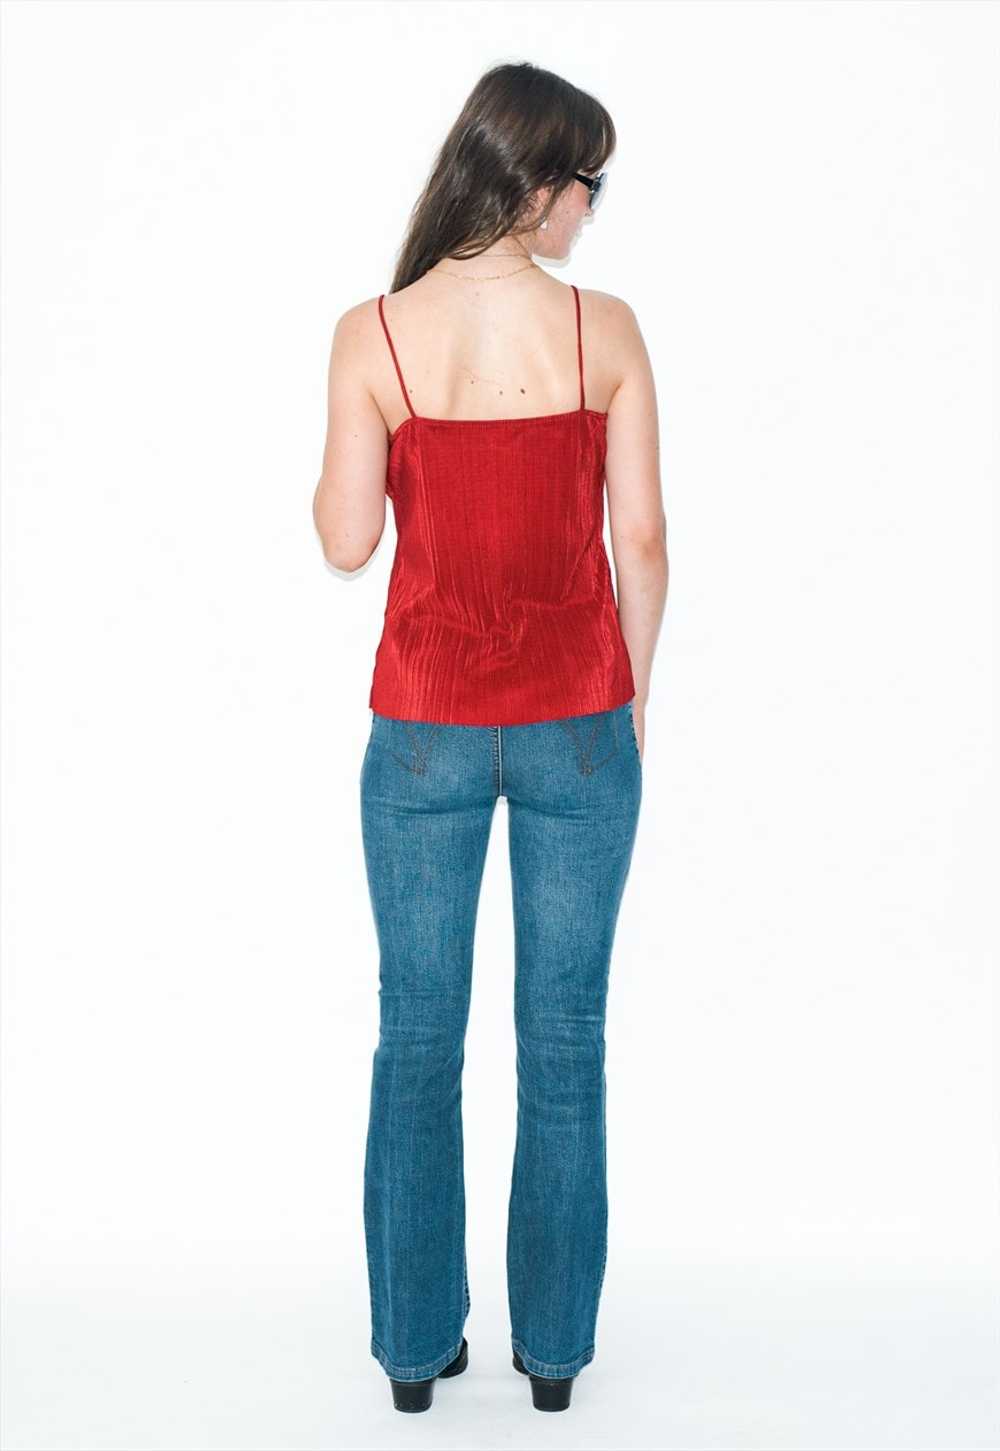 Vintage 90s stretchy cute sleeve-less top in red - image 3